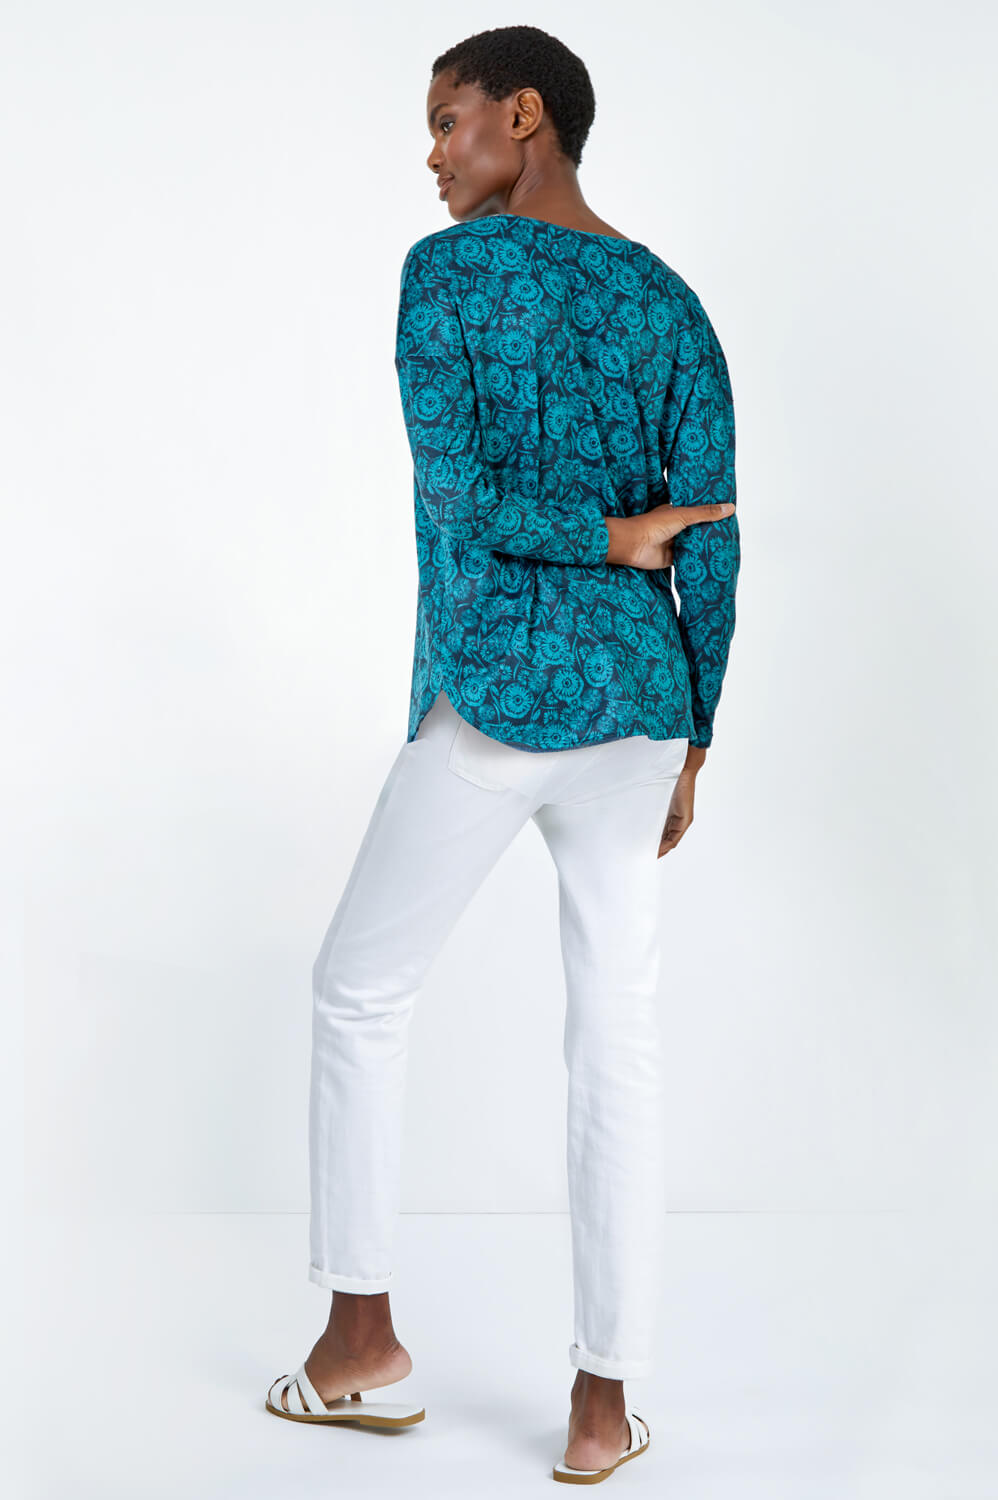 Teal Floral Soft Stretch Jersey Top, Image 3 of 5